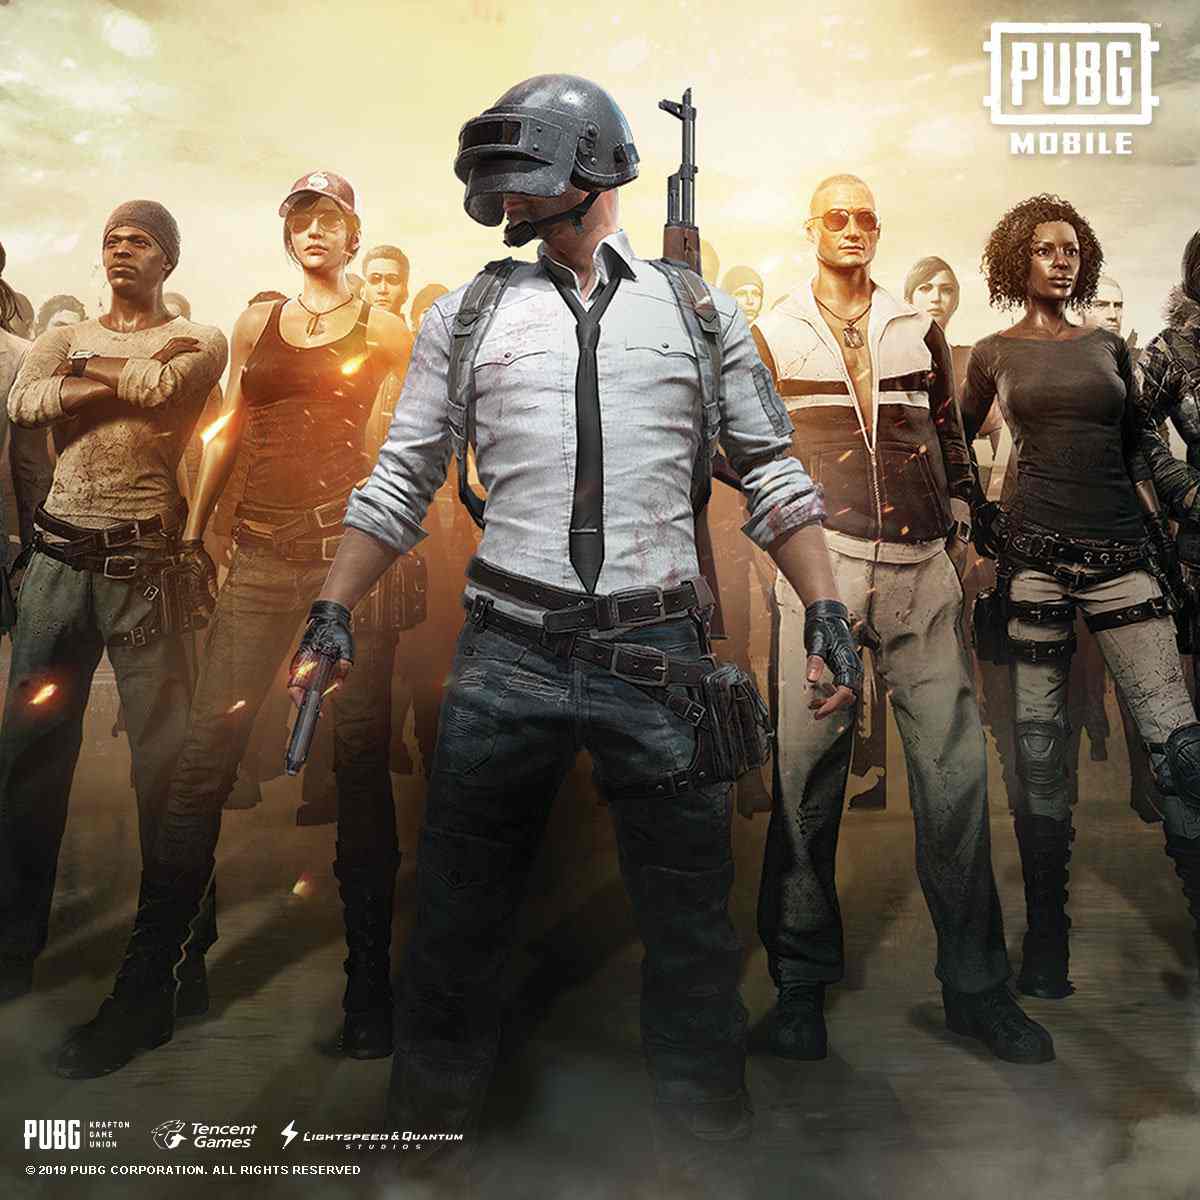 PUBG Mobile banned players list revealed to promote fair play